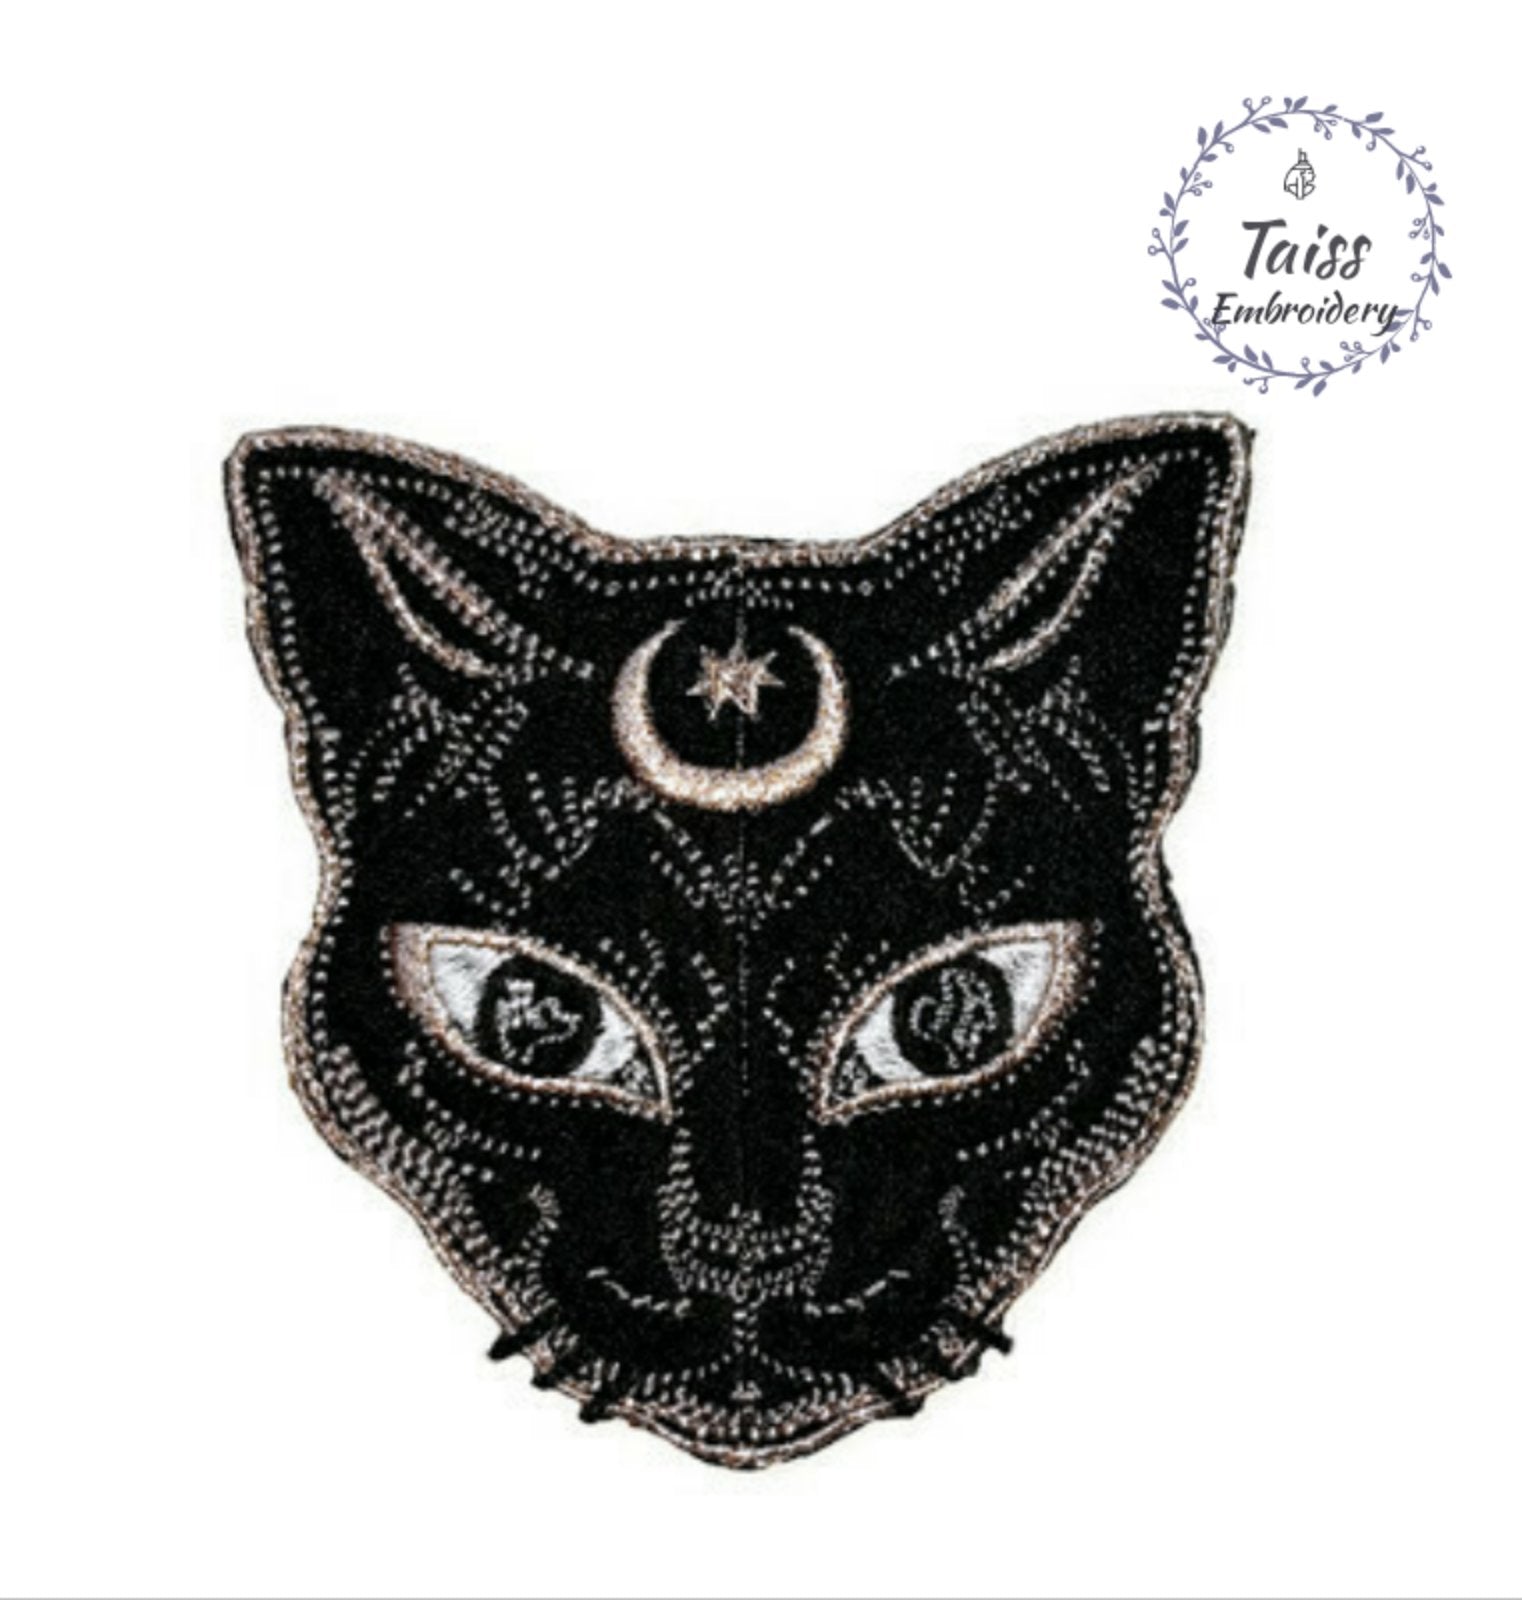 Red Cat's Eye Tattoo Wicca Occult Goth Patches For Clothing Badges